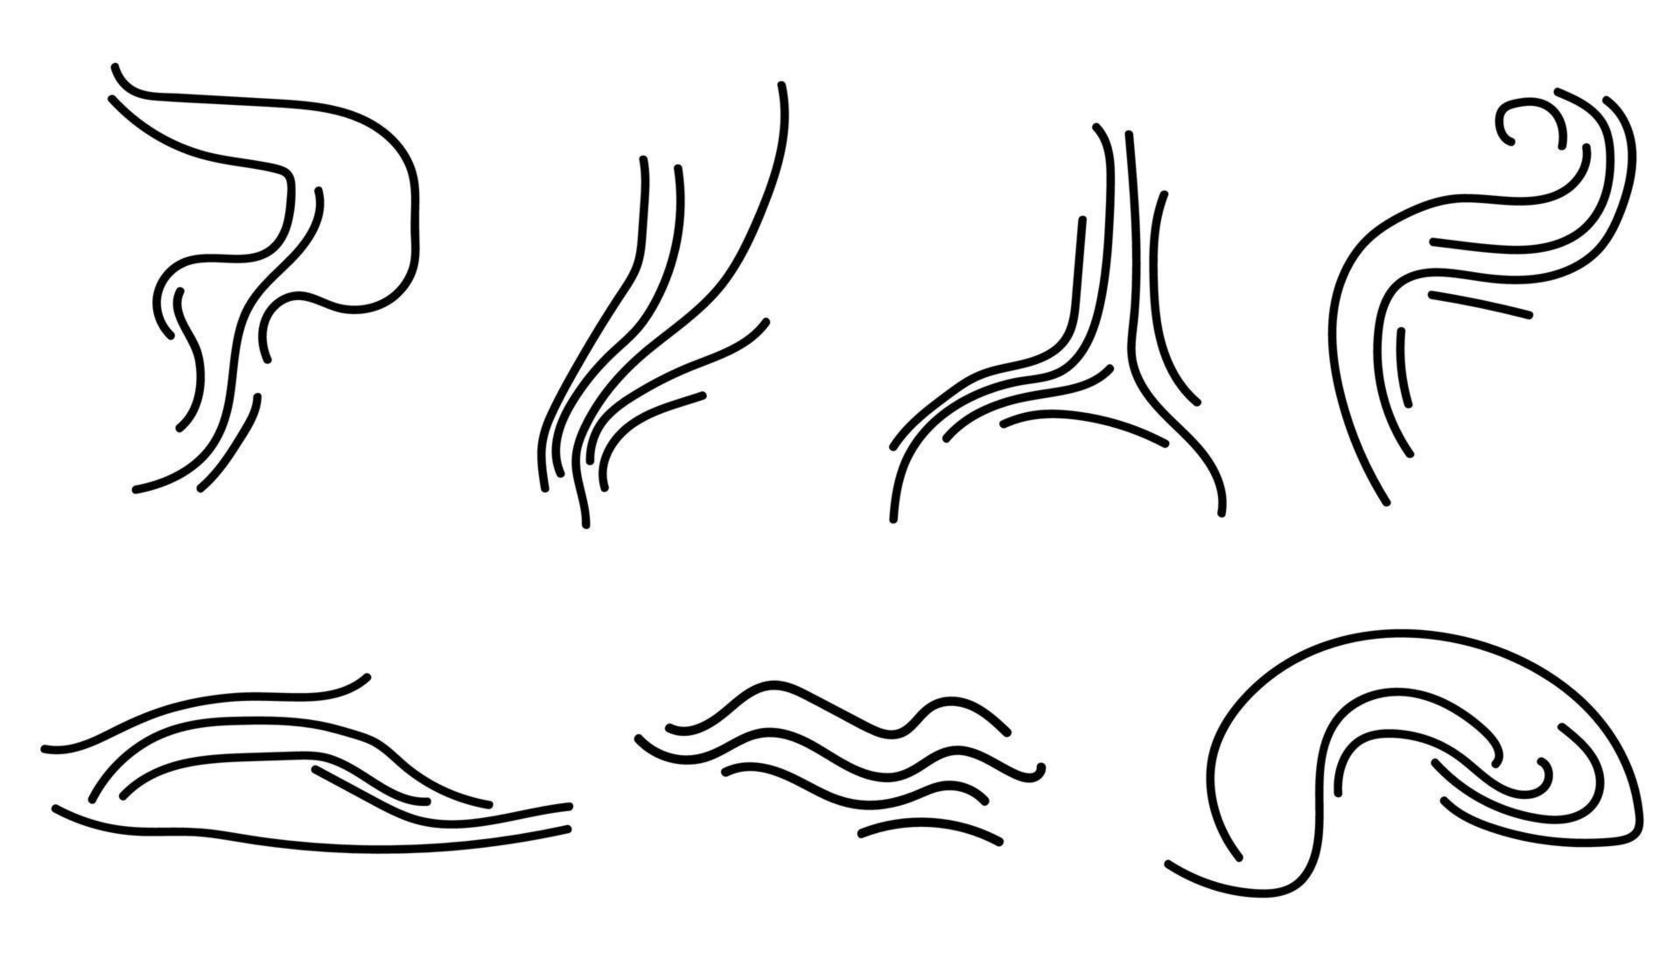 Set of vector hand drawn curved lines of different shapes and directions.